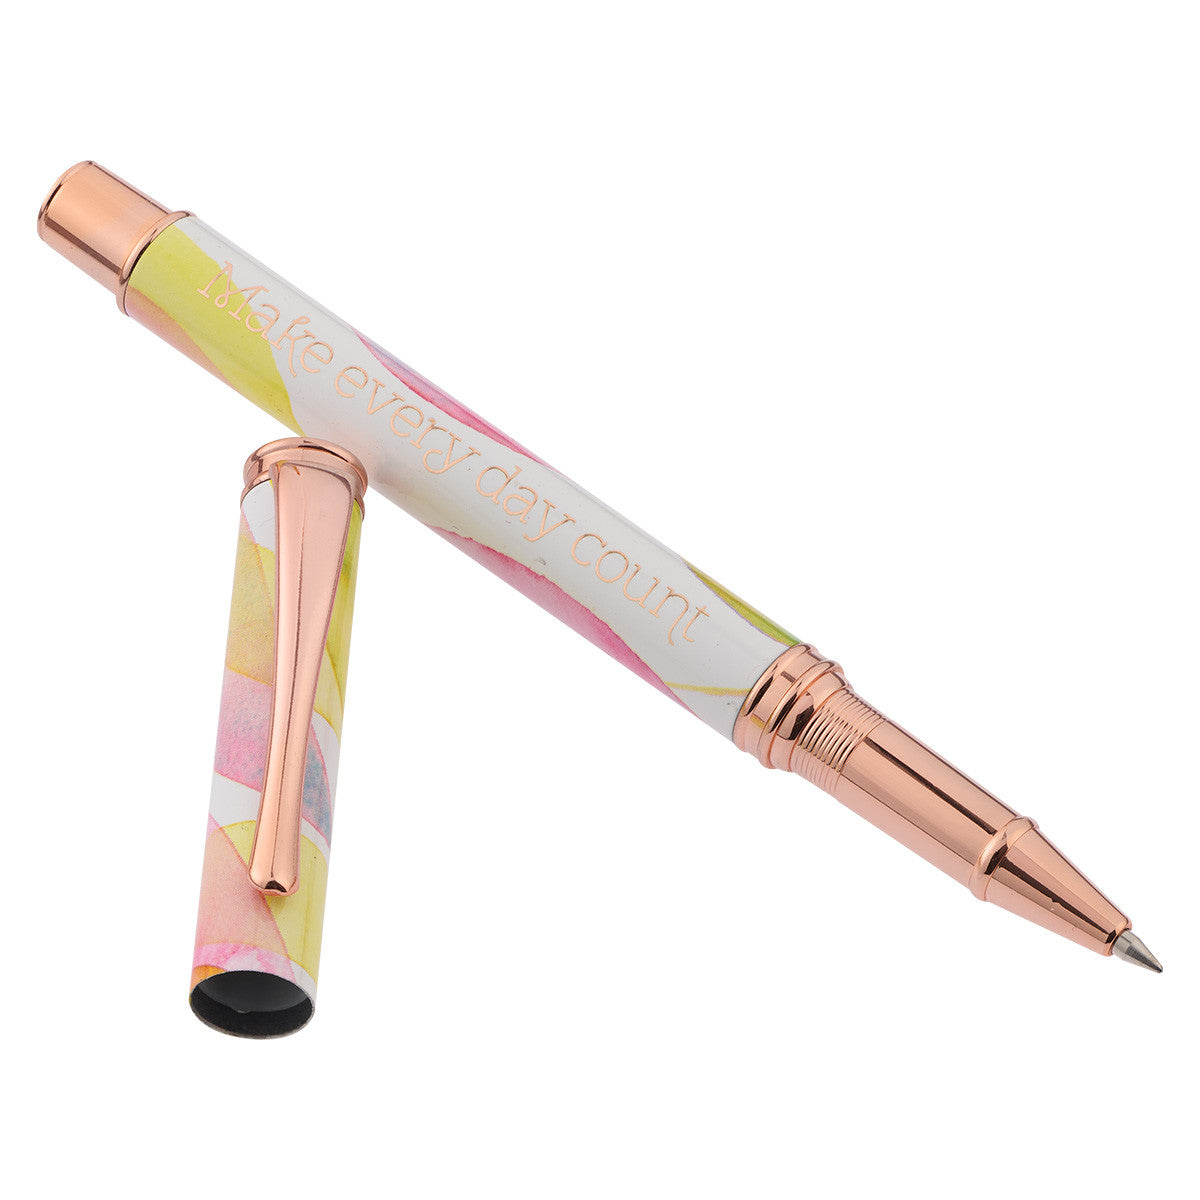 Make Every Day Count Citrus Leaves Gift Pen - The Christian Gift Company